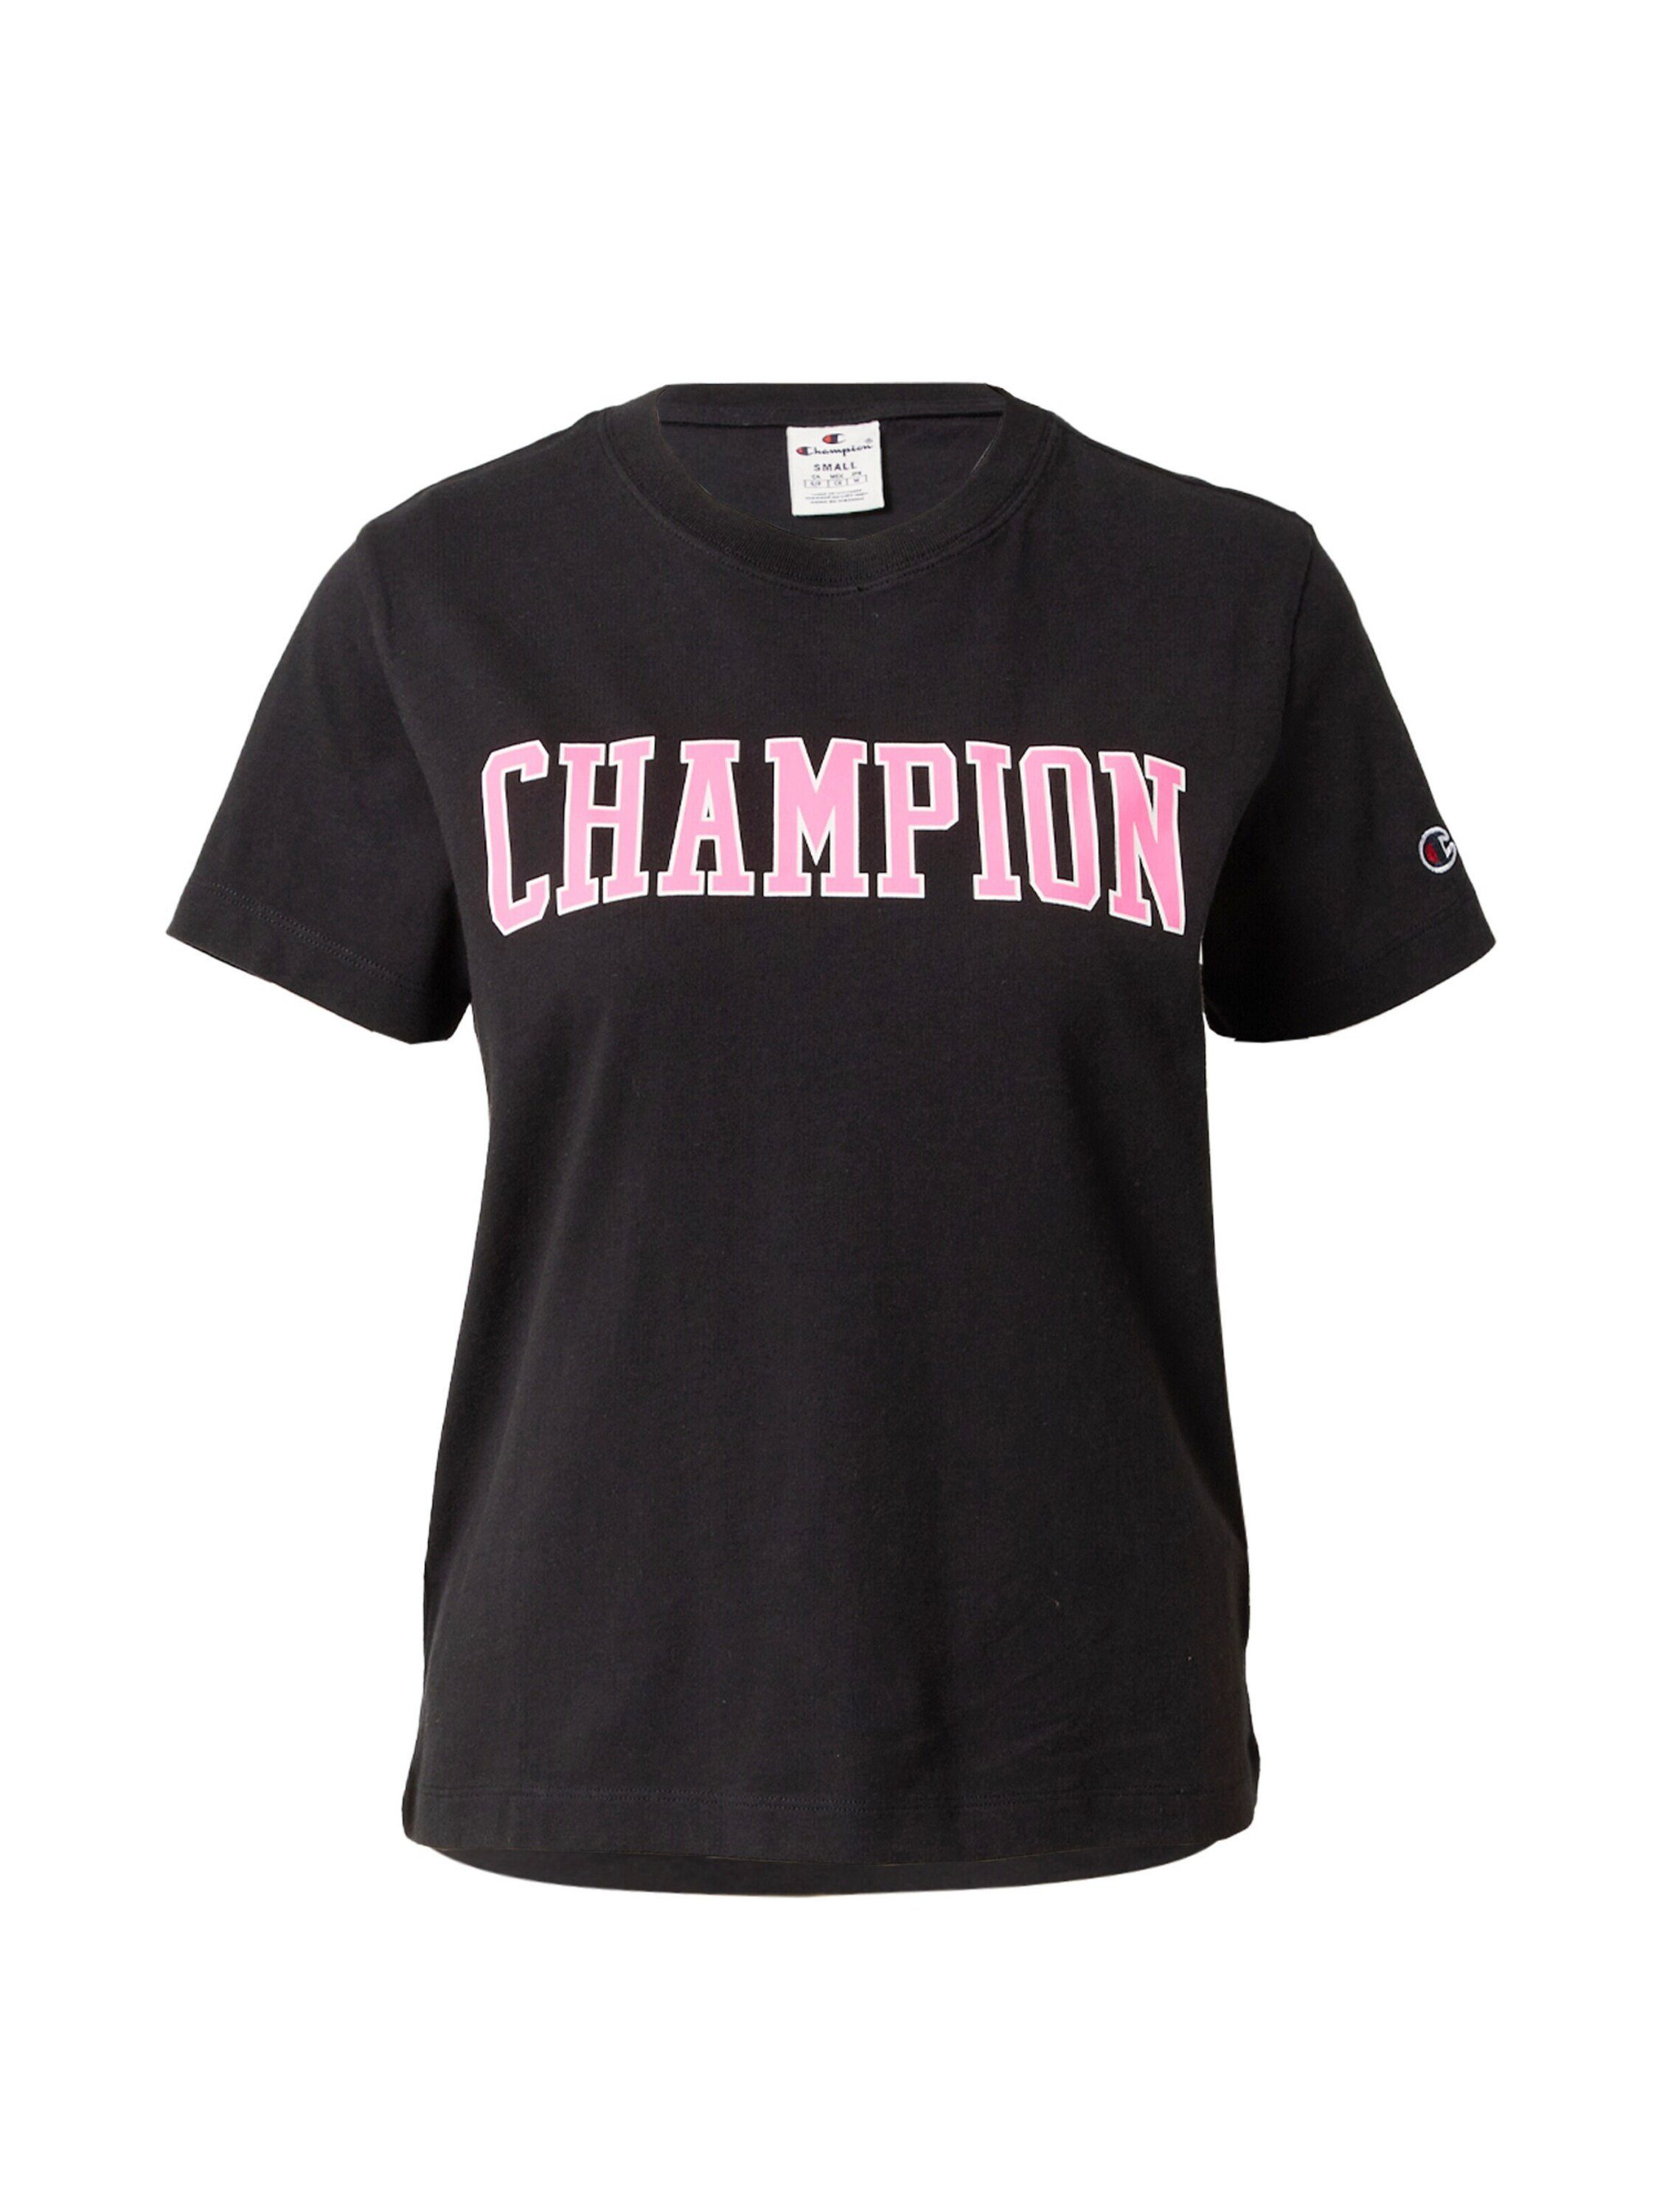 Champion Authentic NBK (1-tlg) Apparel Weiteres T-Shirt Detail Athletic